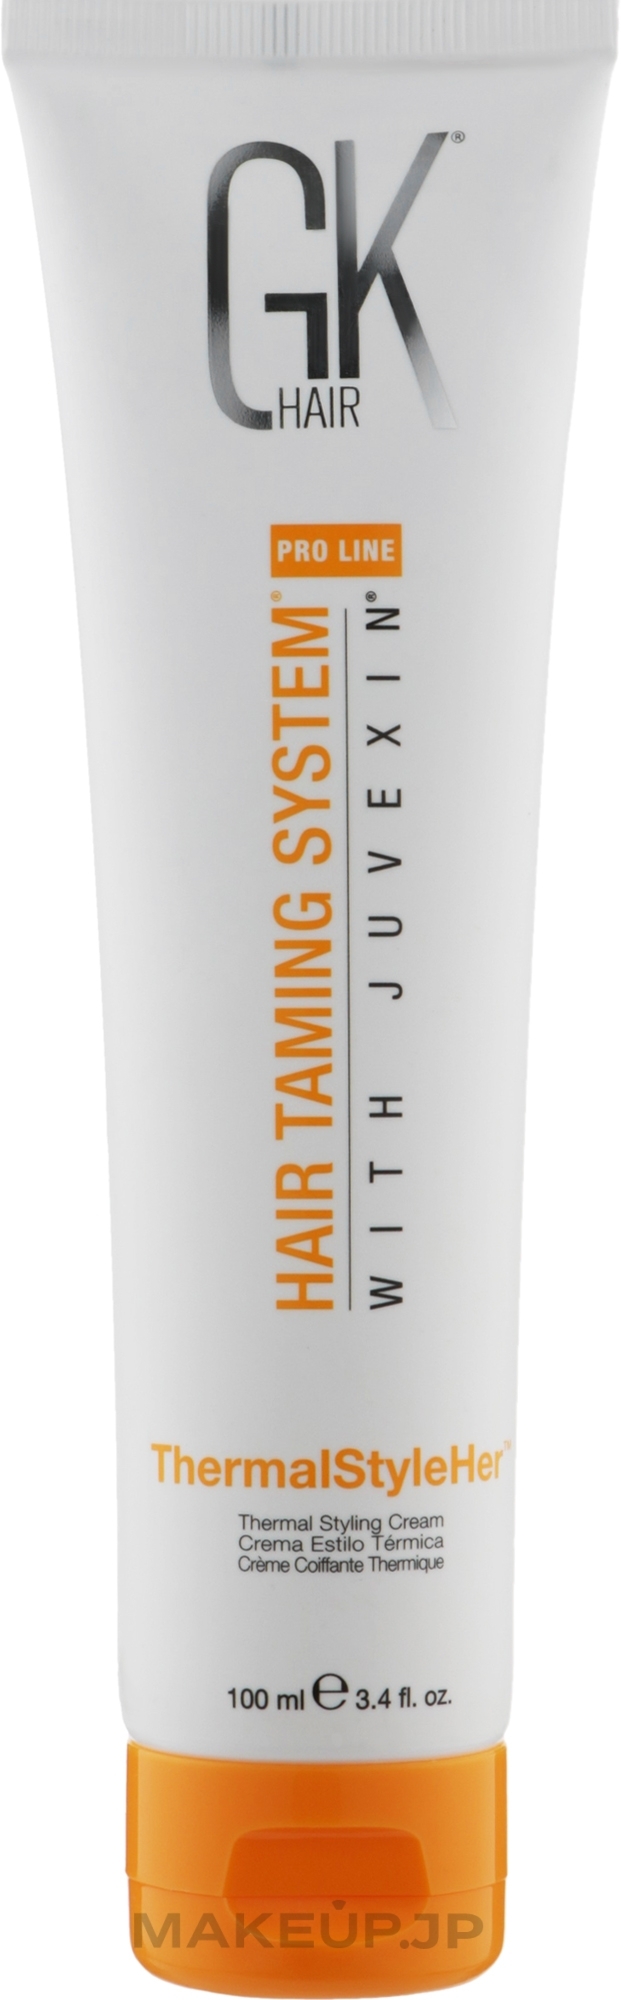 Protective Hot Styling Cream - GKhair Hair Thermal Style Her — photo 100 ml